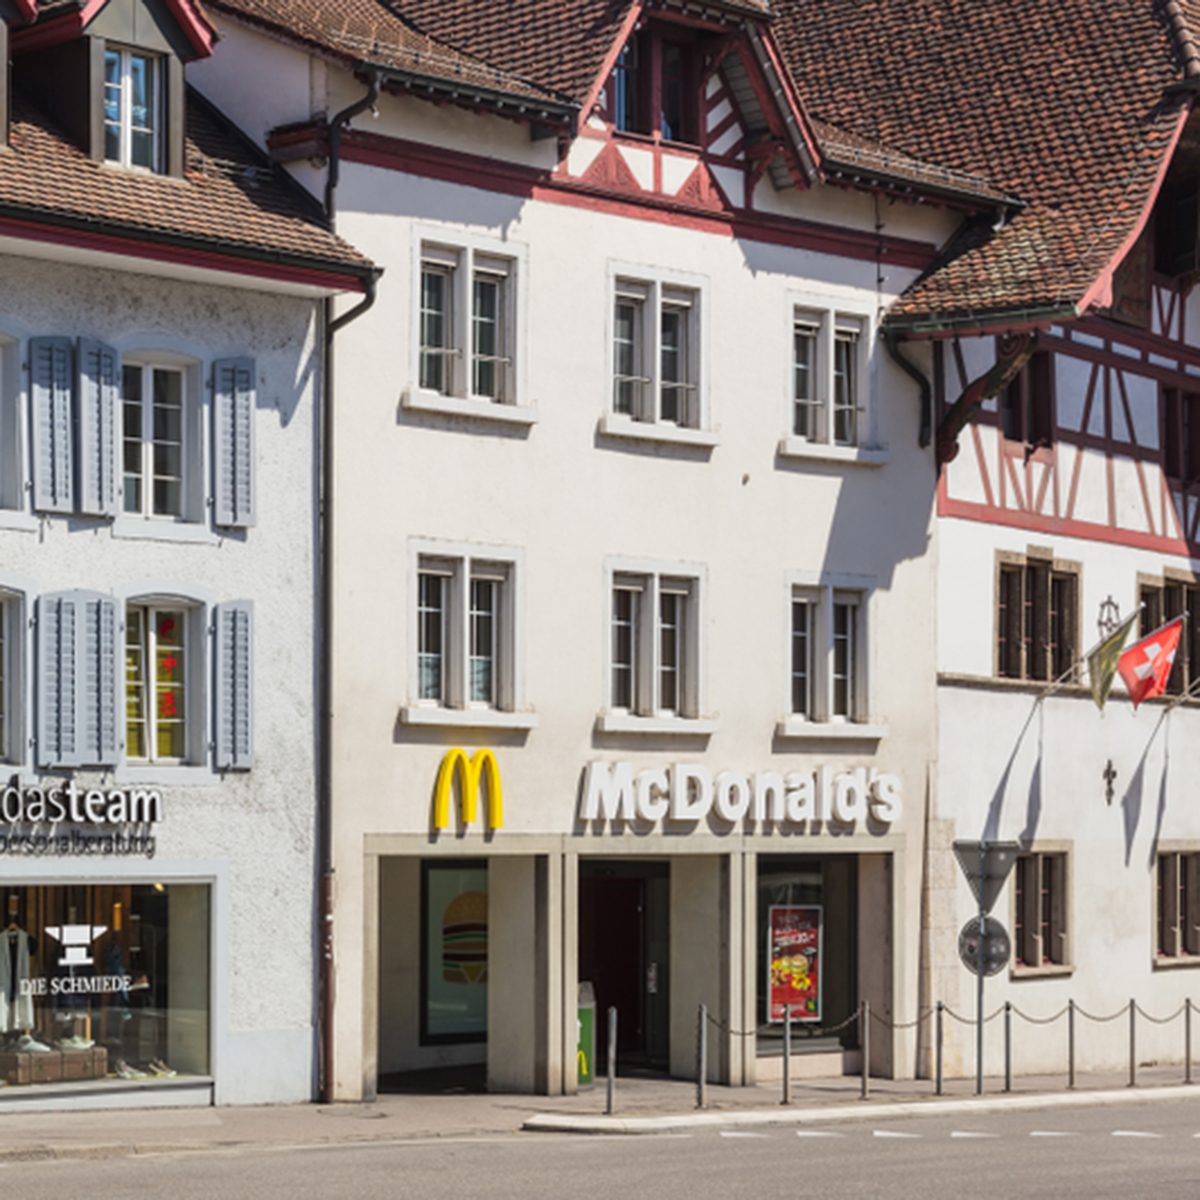 Aarau, Switzerland - 7 July, 2016: building along a street in the historic part of the town. The town of Aarau is the capital of the Swiss canton of Aargau.